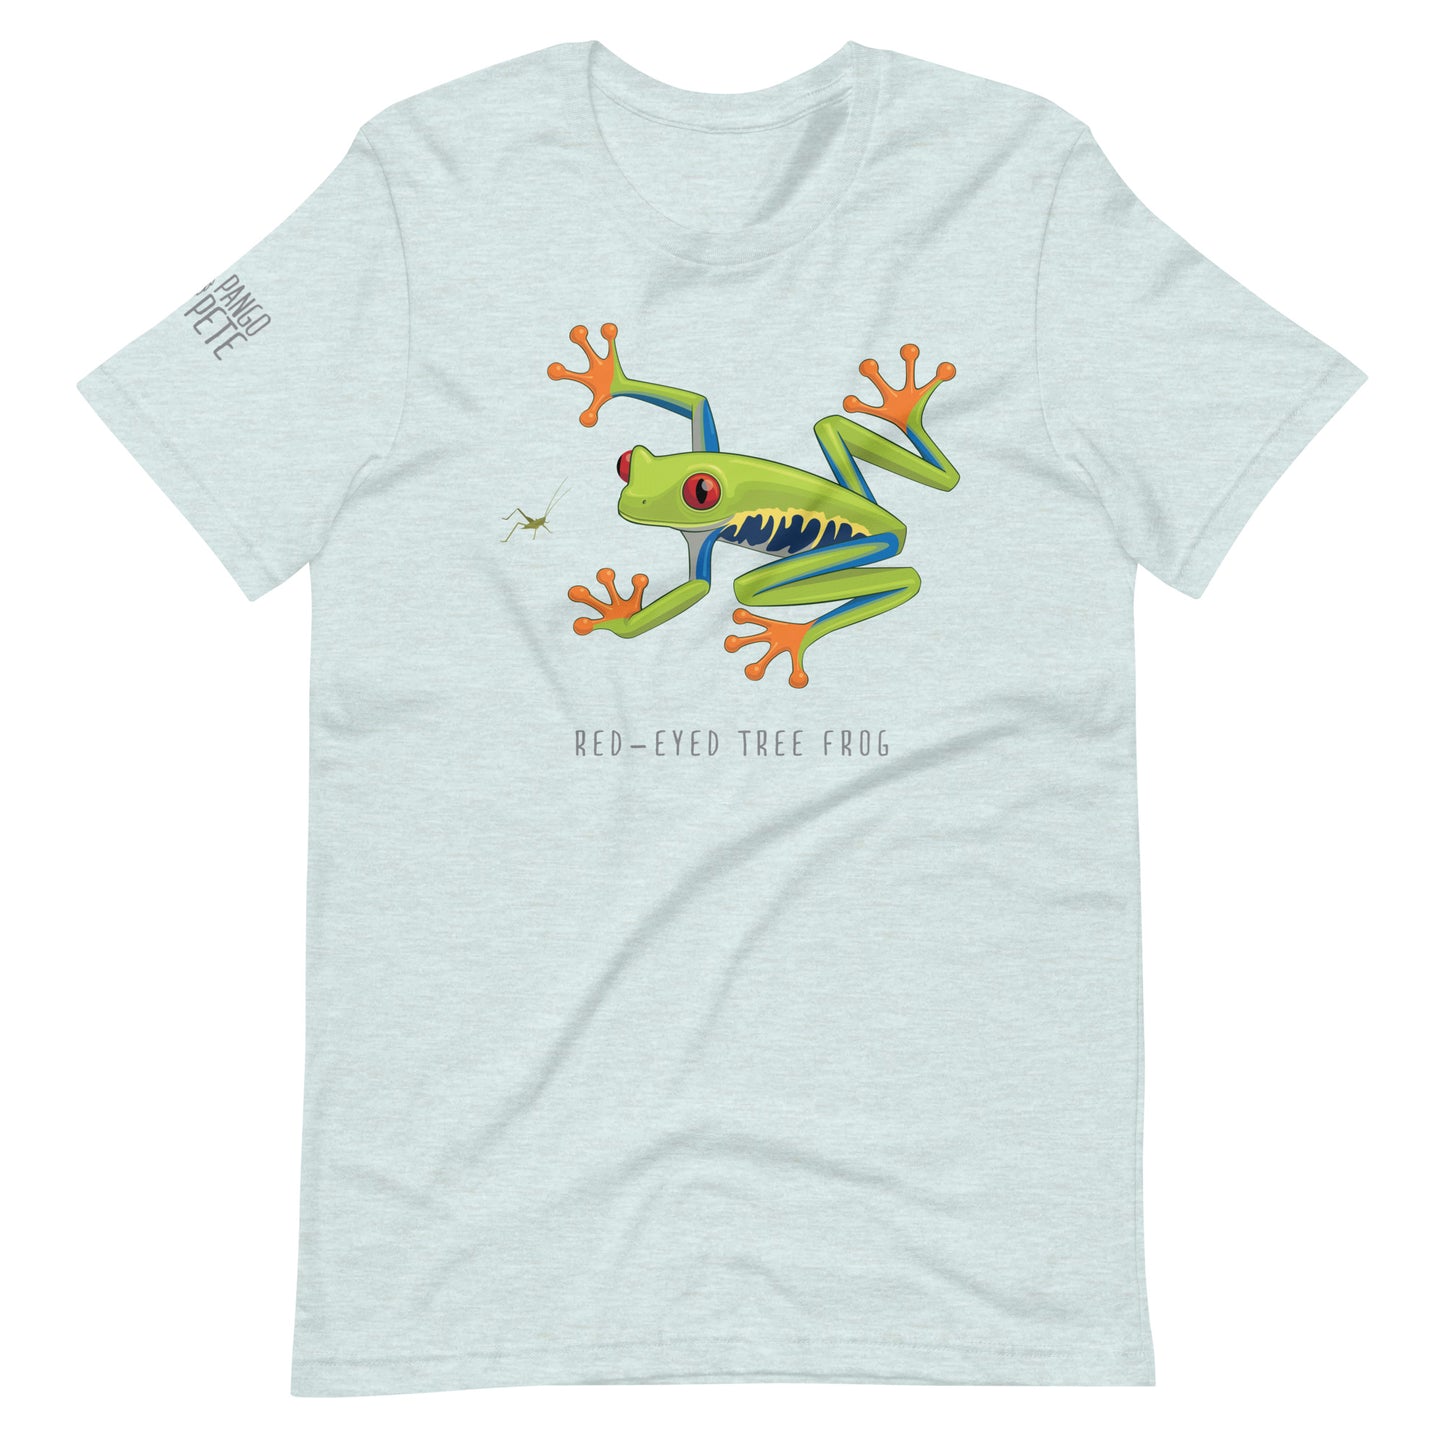 Red-Eyed Tree Frog T-shirt